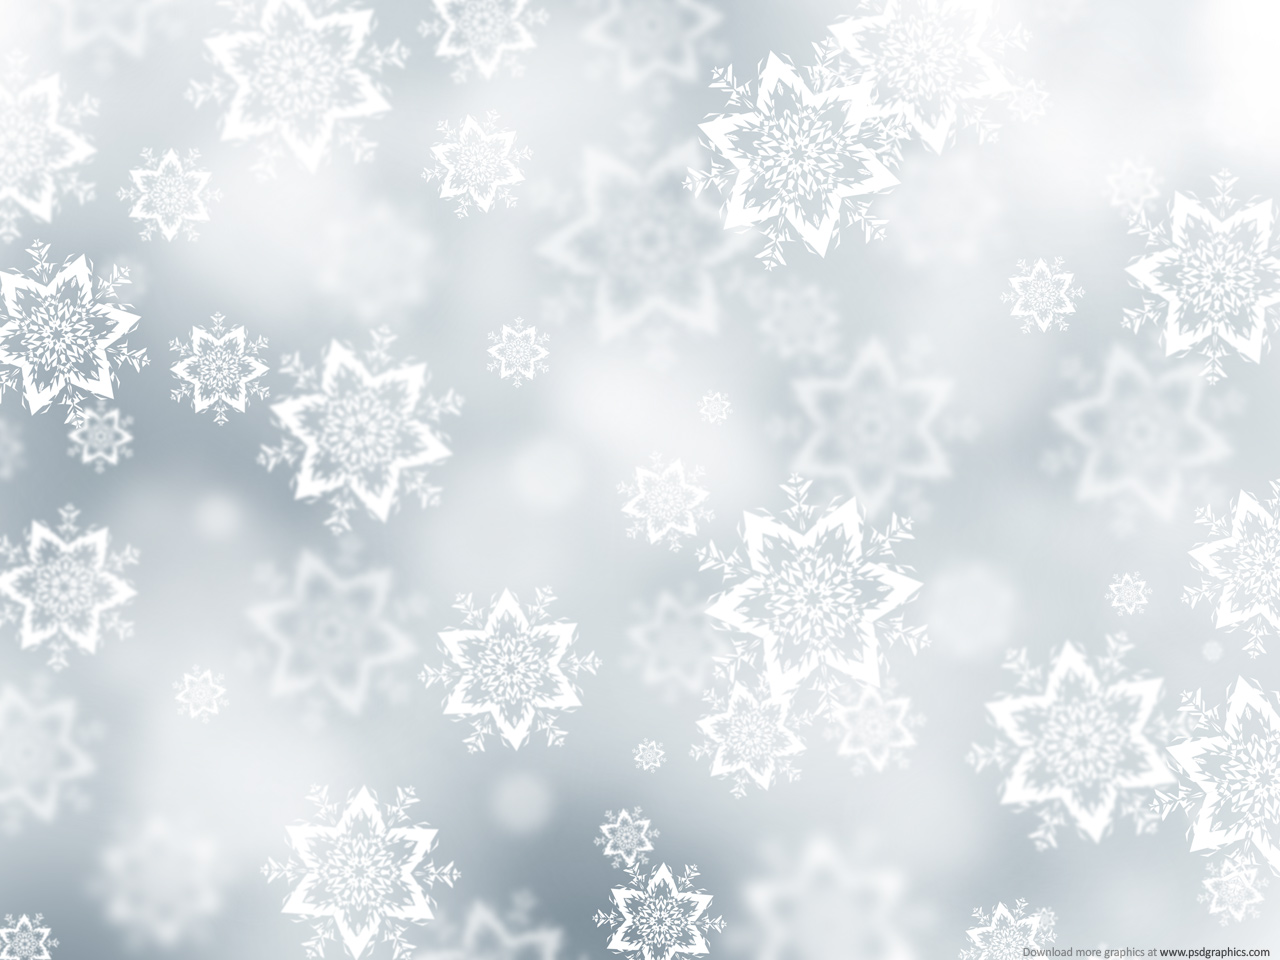 Medium size preview 1280x960px Christmas snow background